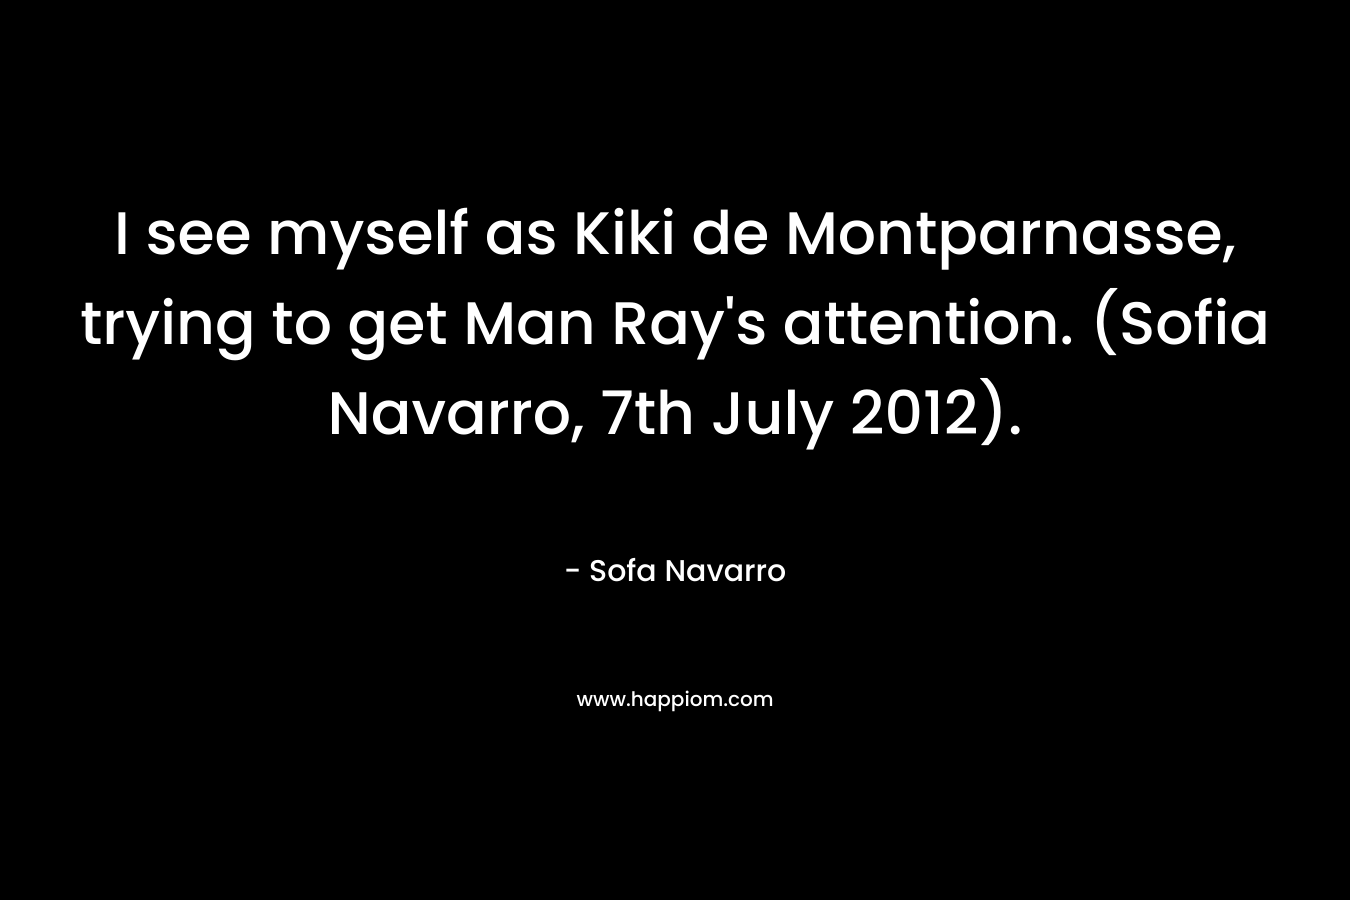 I see myself as Kiki de Montparnasse, trying to get Man Ray's attention. (Sofia Navarro, 7th July 2012).